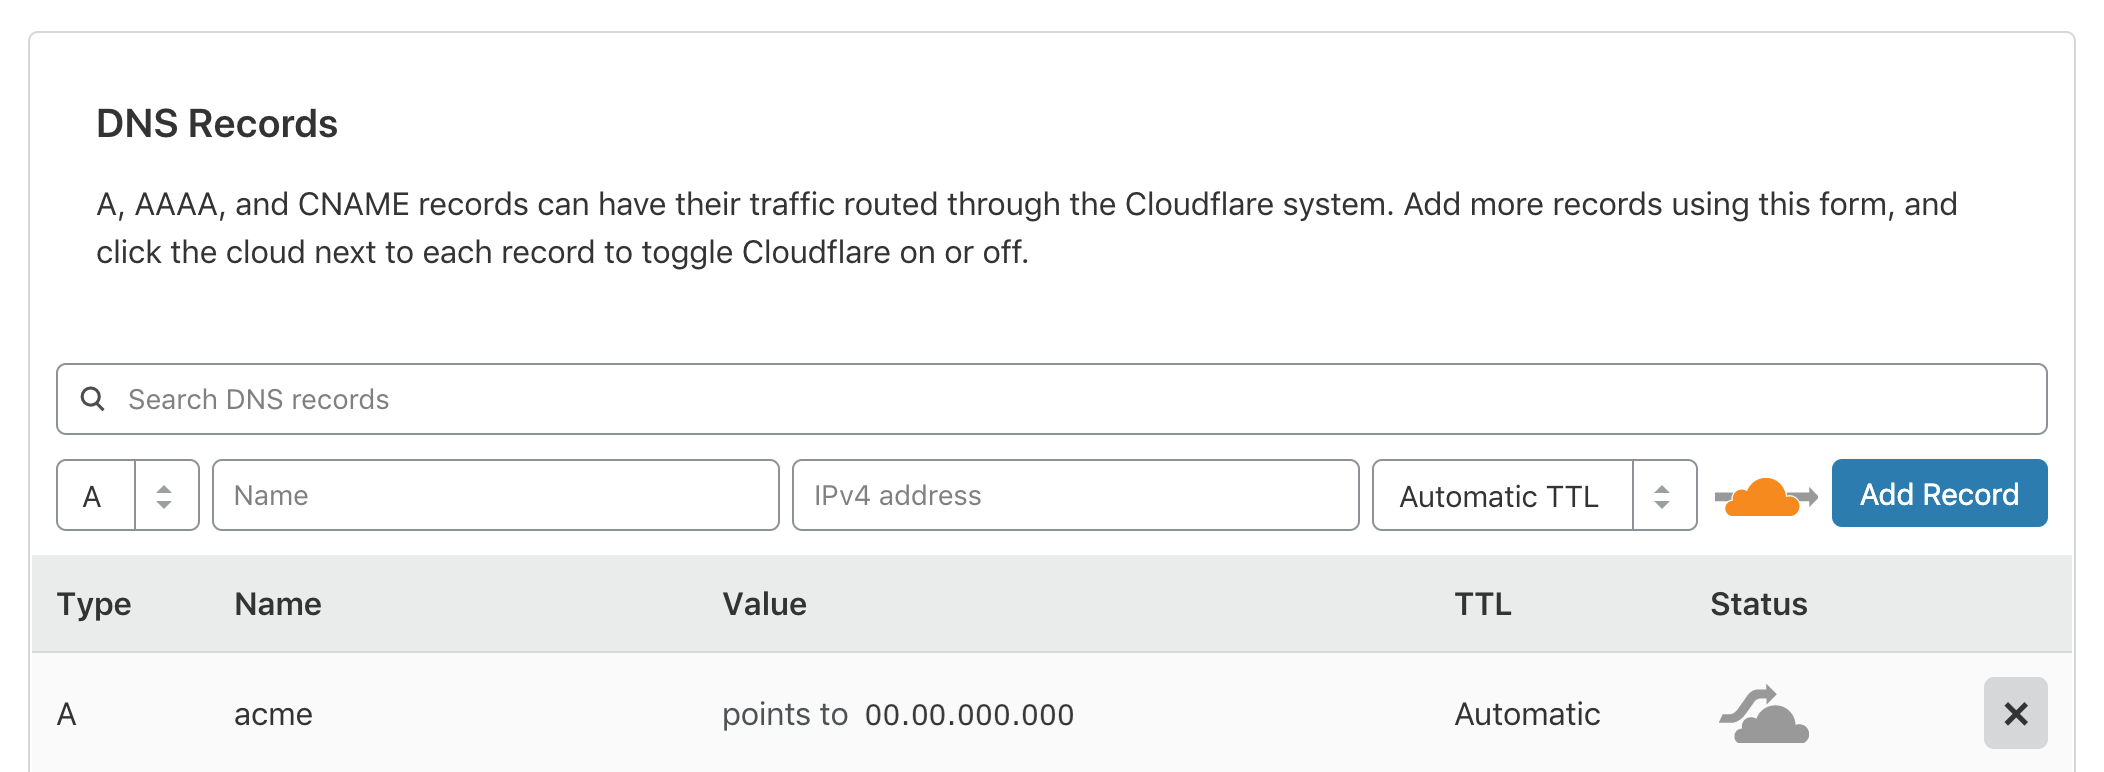 This example uses Cloudflare as a domain name registrar to create DNS records.